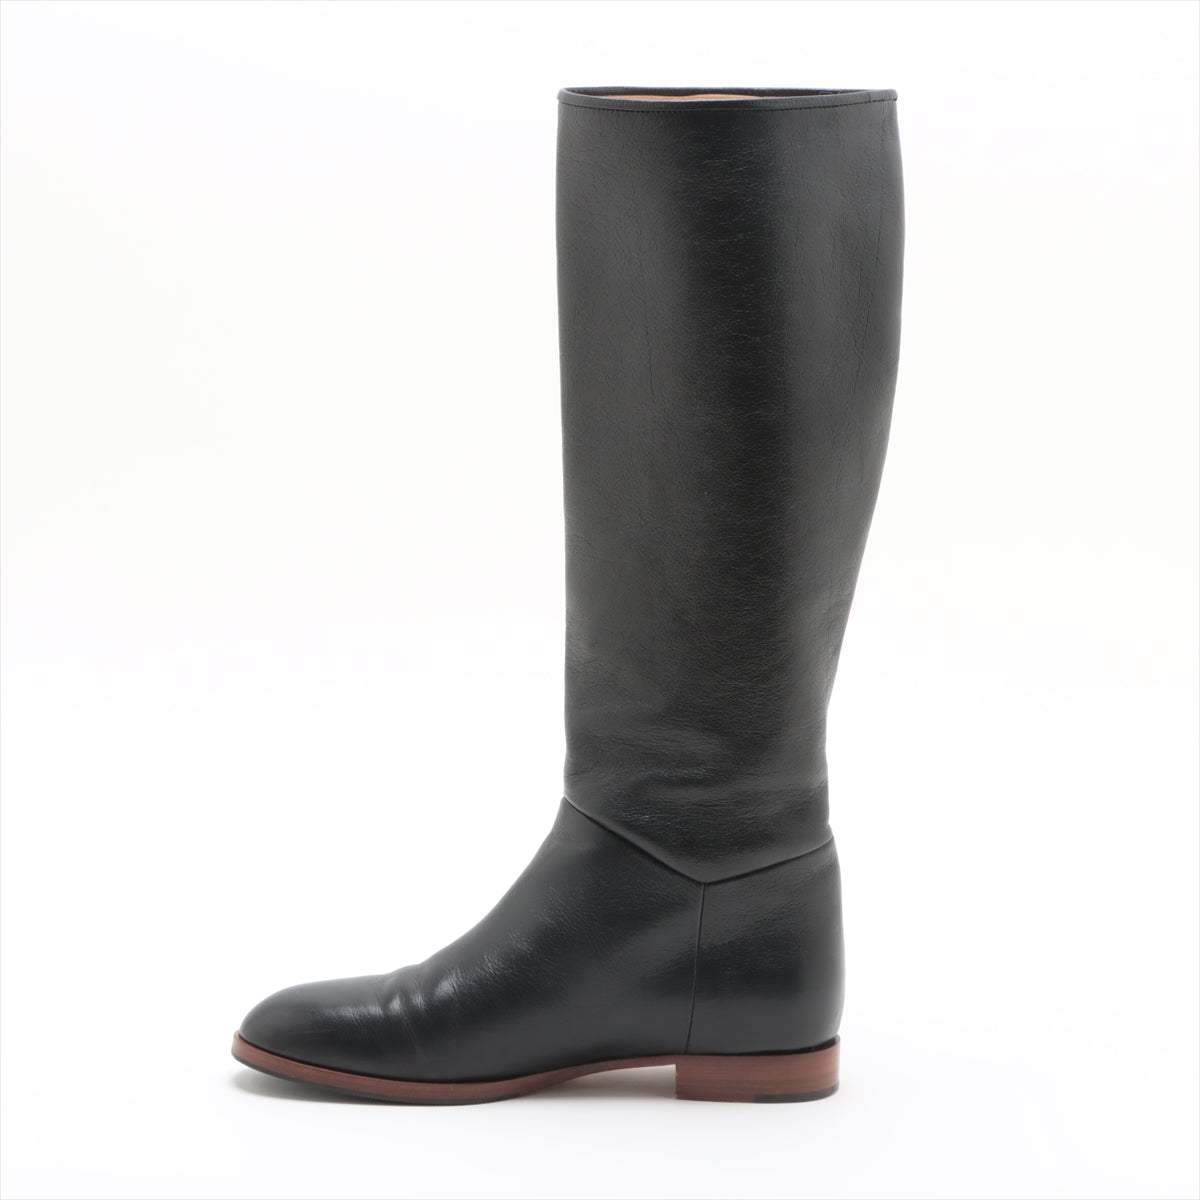 Gucci Leather Long boots 36 Ladies' Black 549678 Sherry Line GG Marmont